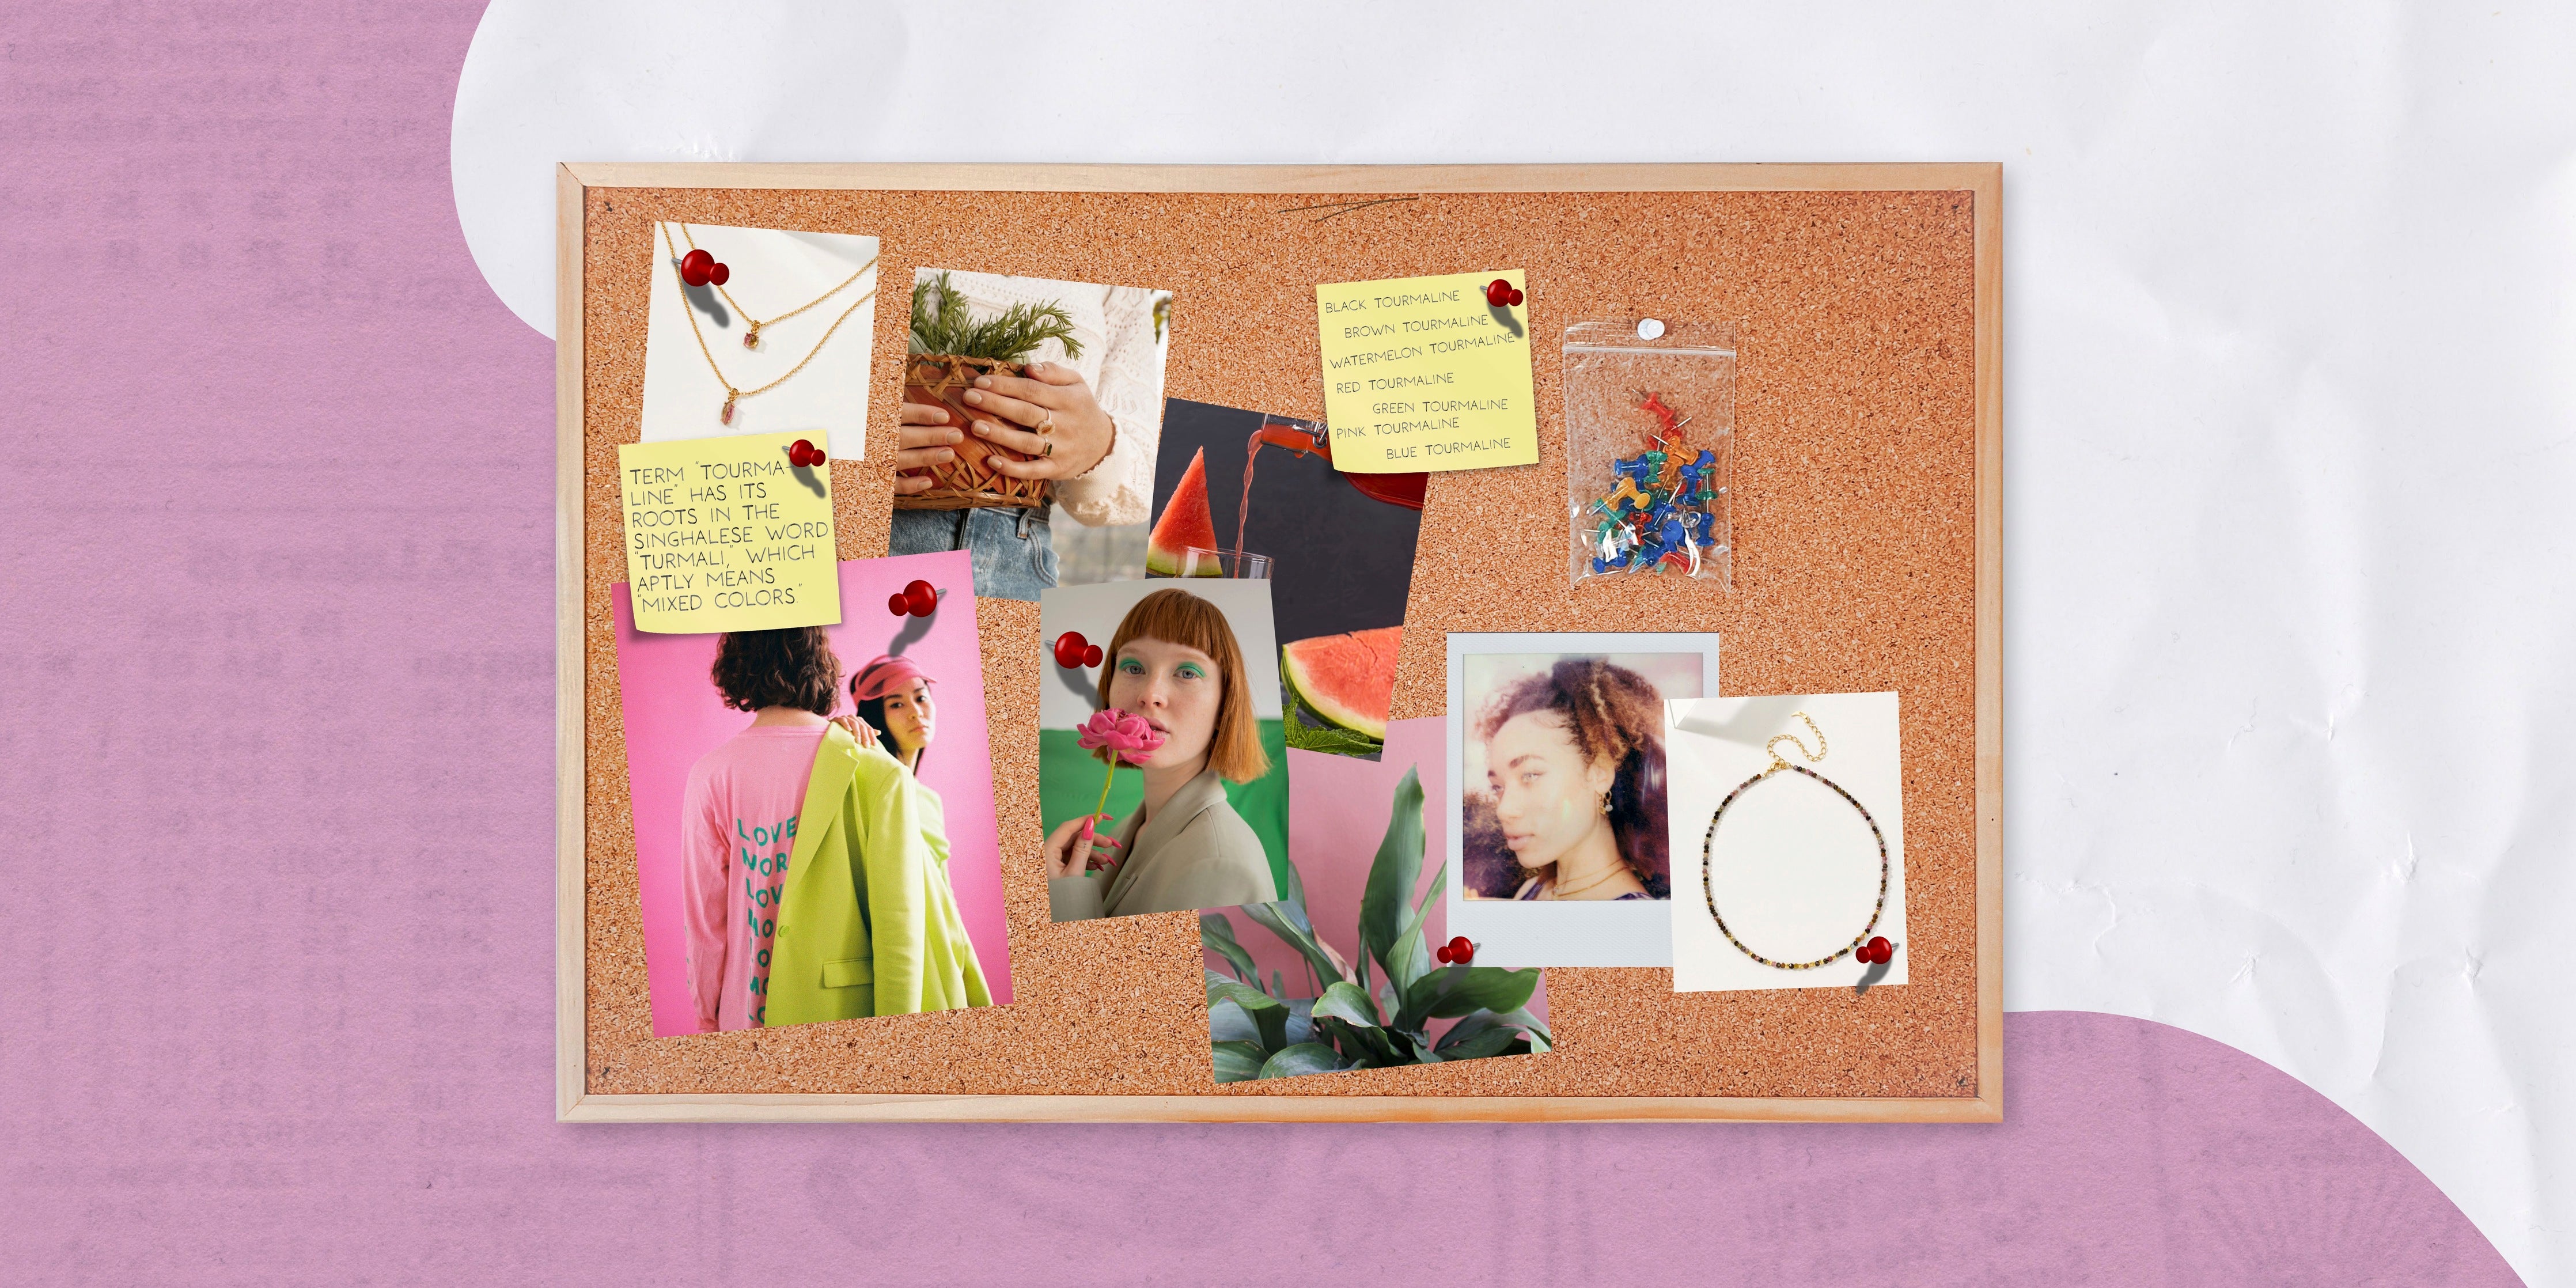 Image of a cork board with various tourmaline jewelry and inspiration images pinned to it